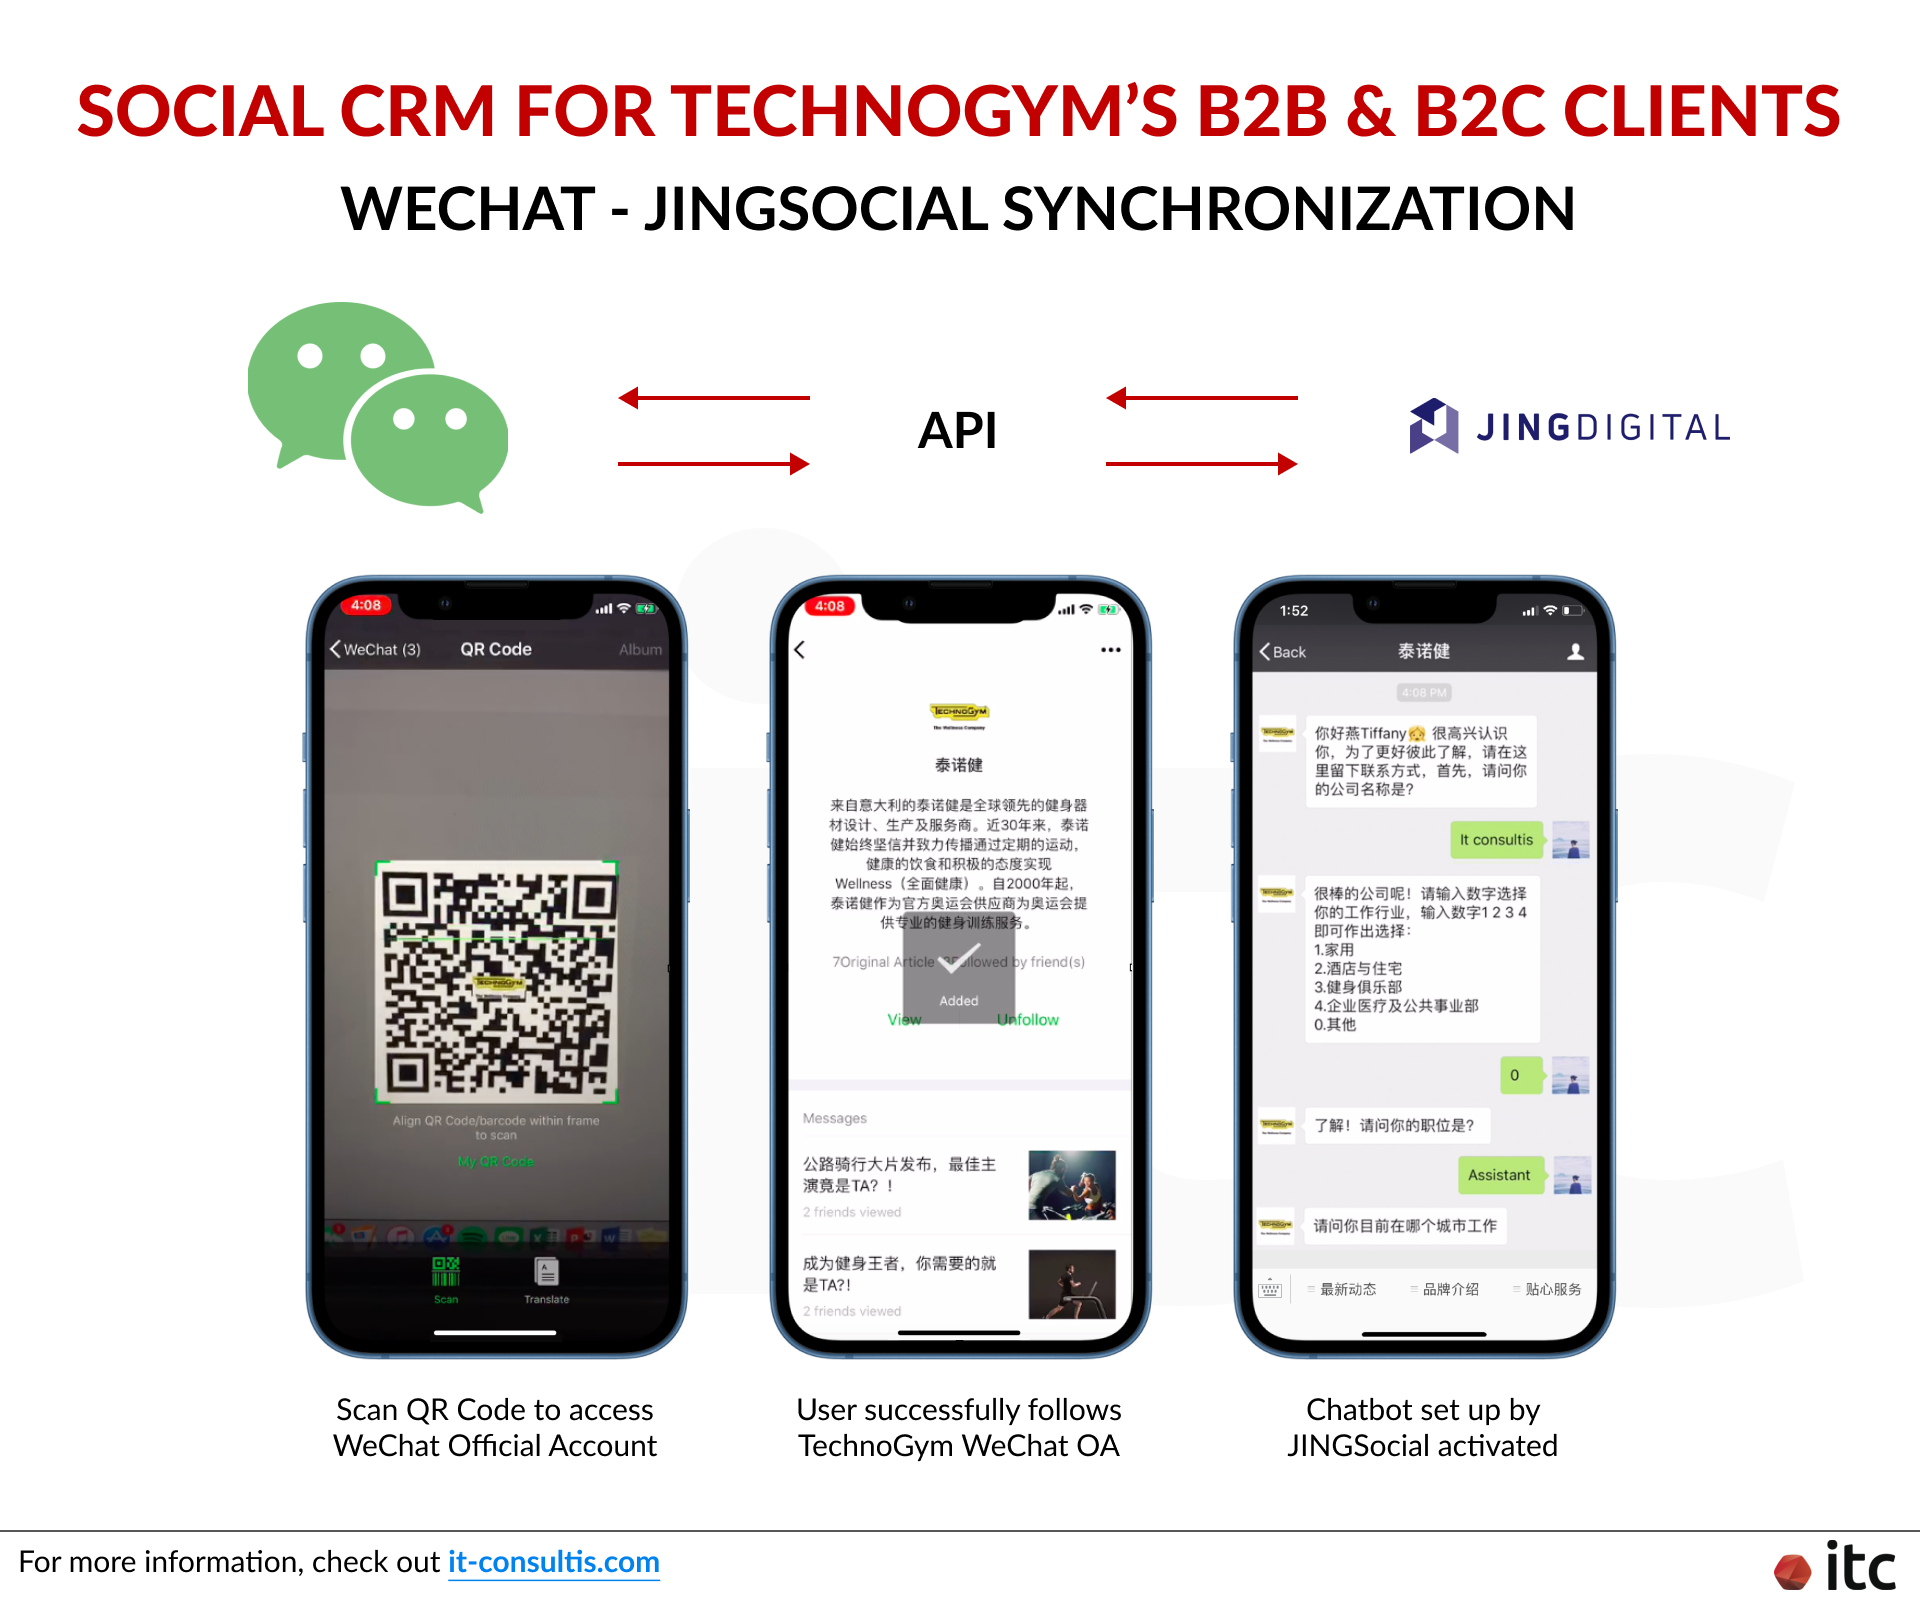 ITC helped TechnoGym, a leading fitness equipment brand, synchronize its WeChat Official Account with JingSocial, develop a holistic social CRM playbook, and successfully implement it